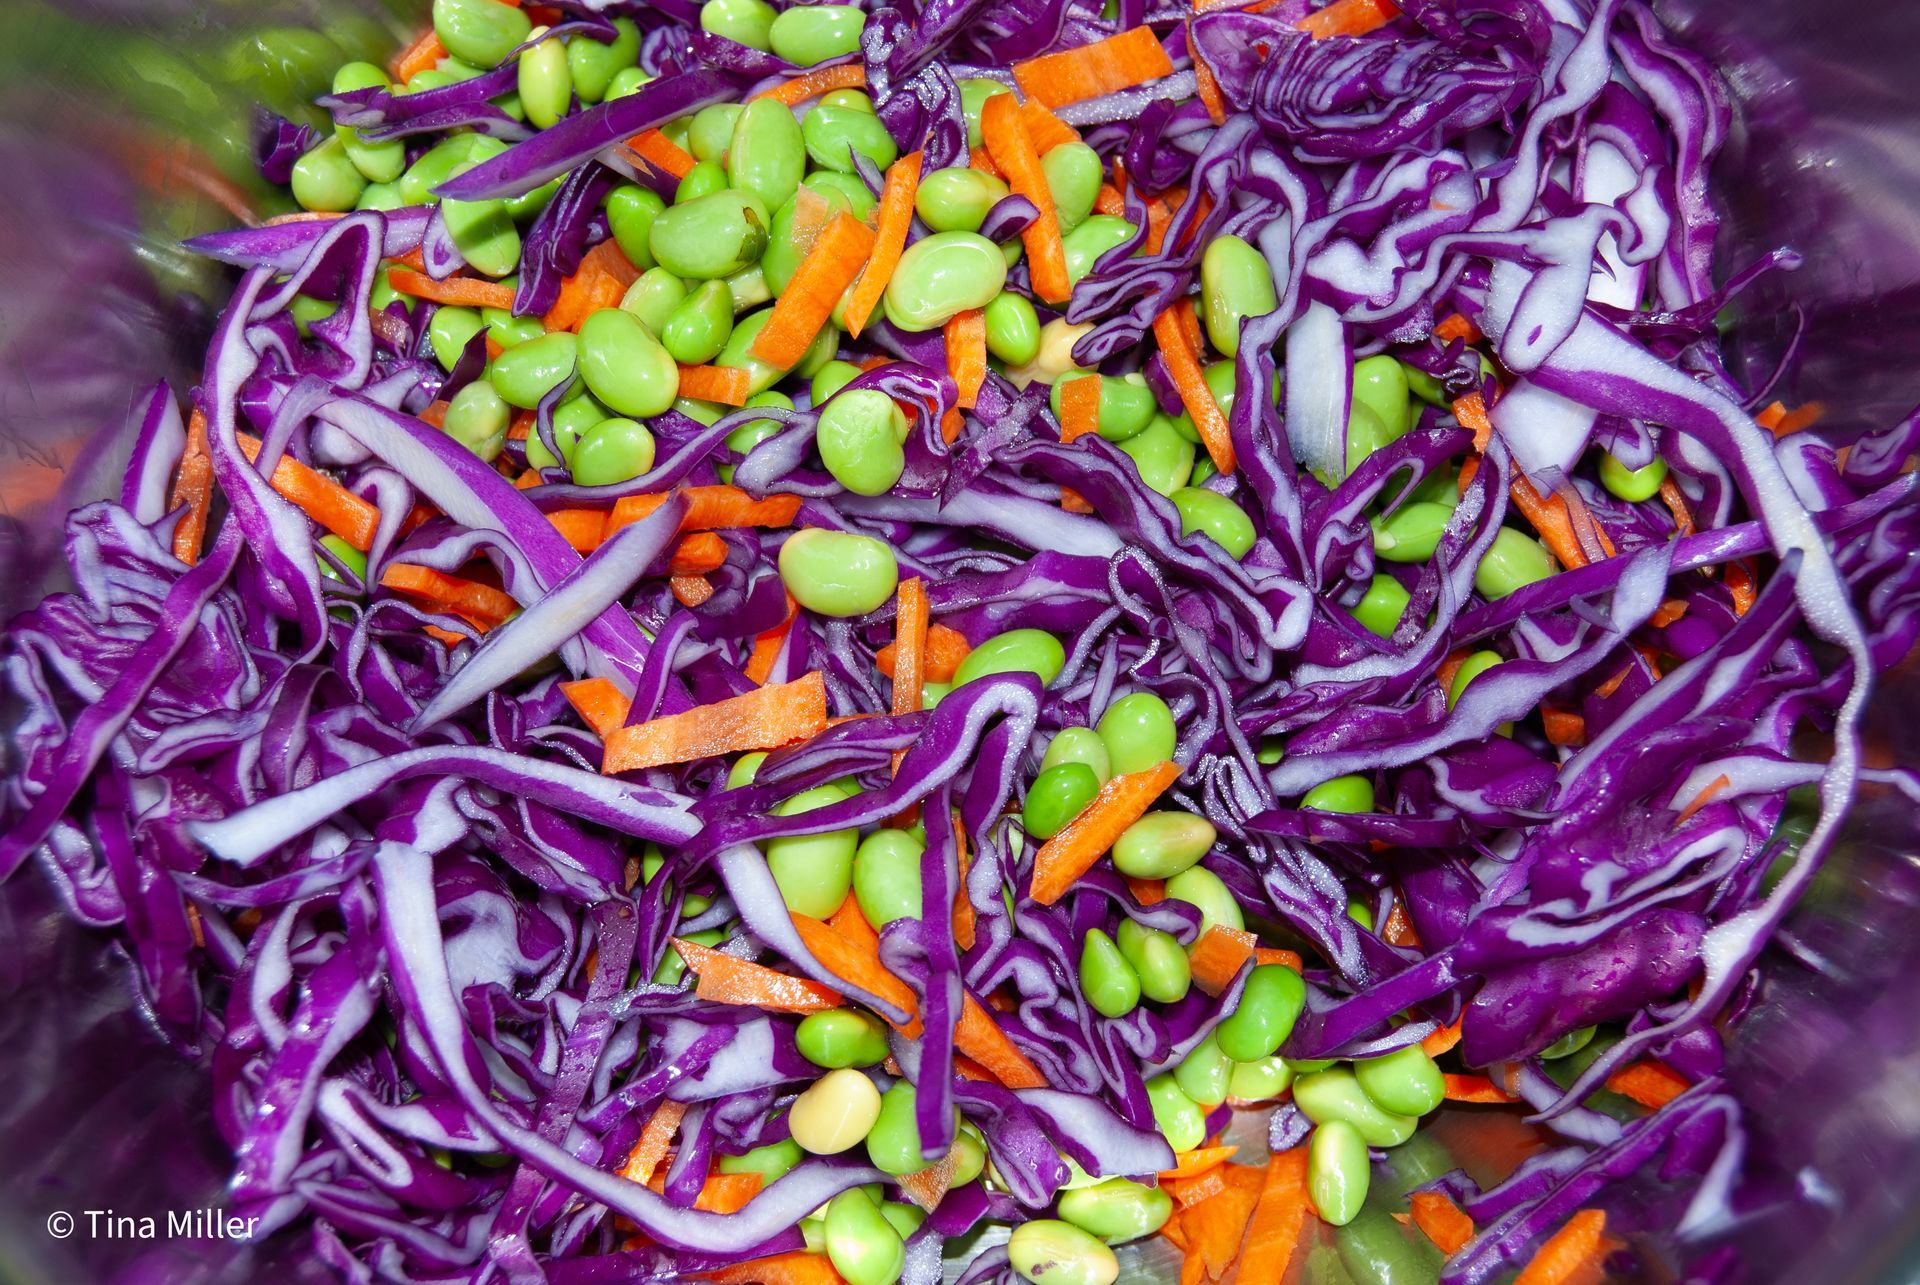 Bright green shelled edamame, shredded red cabbage, and orange julienne carrots tossed together in a metal mixing bowl.